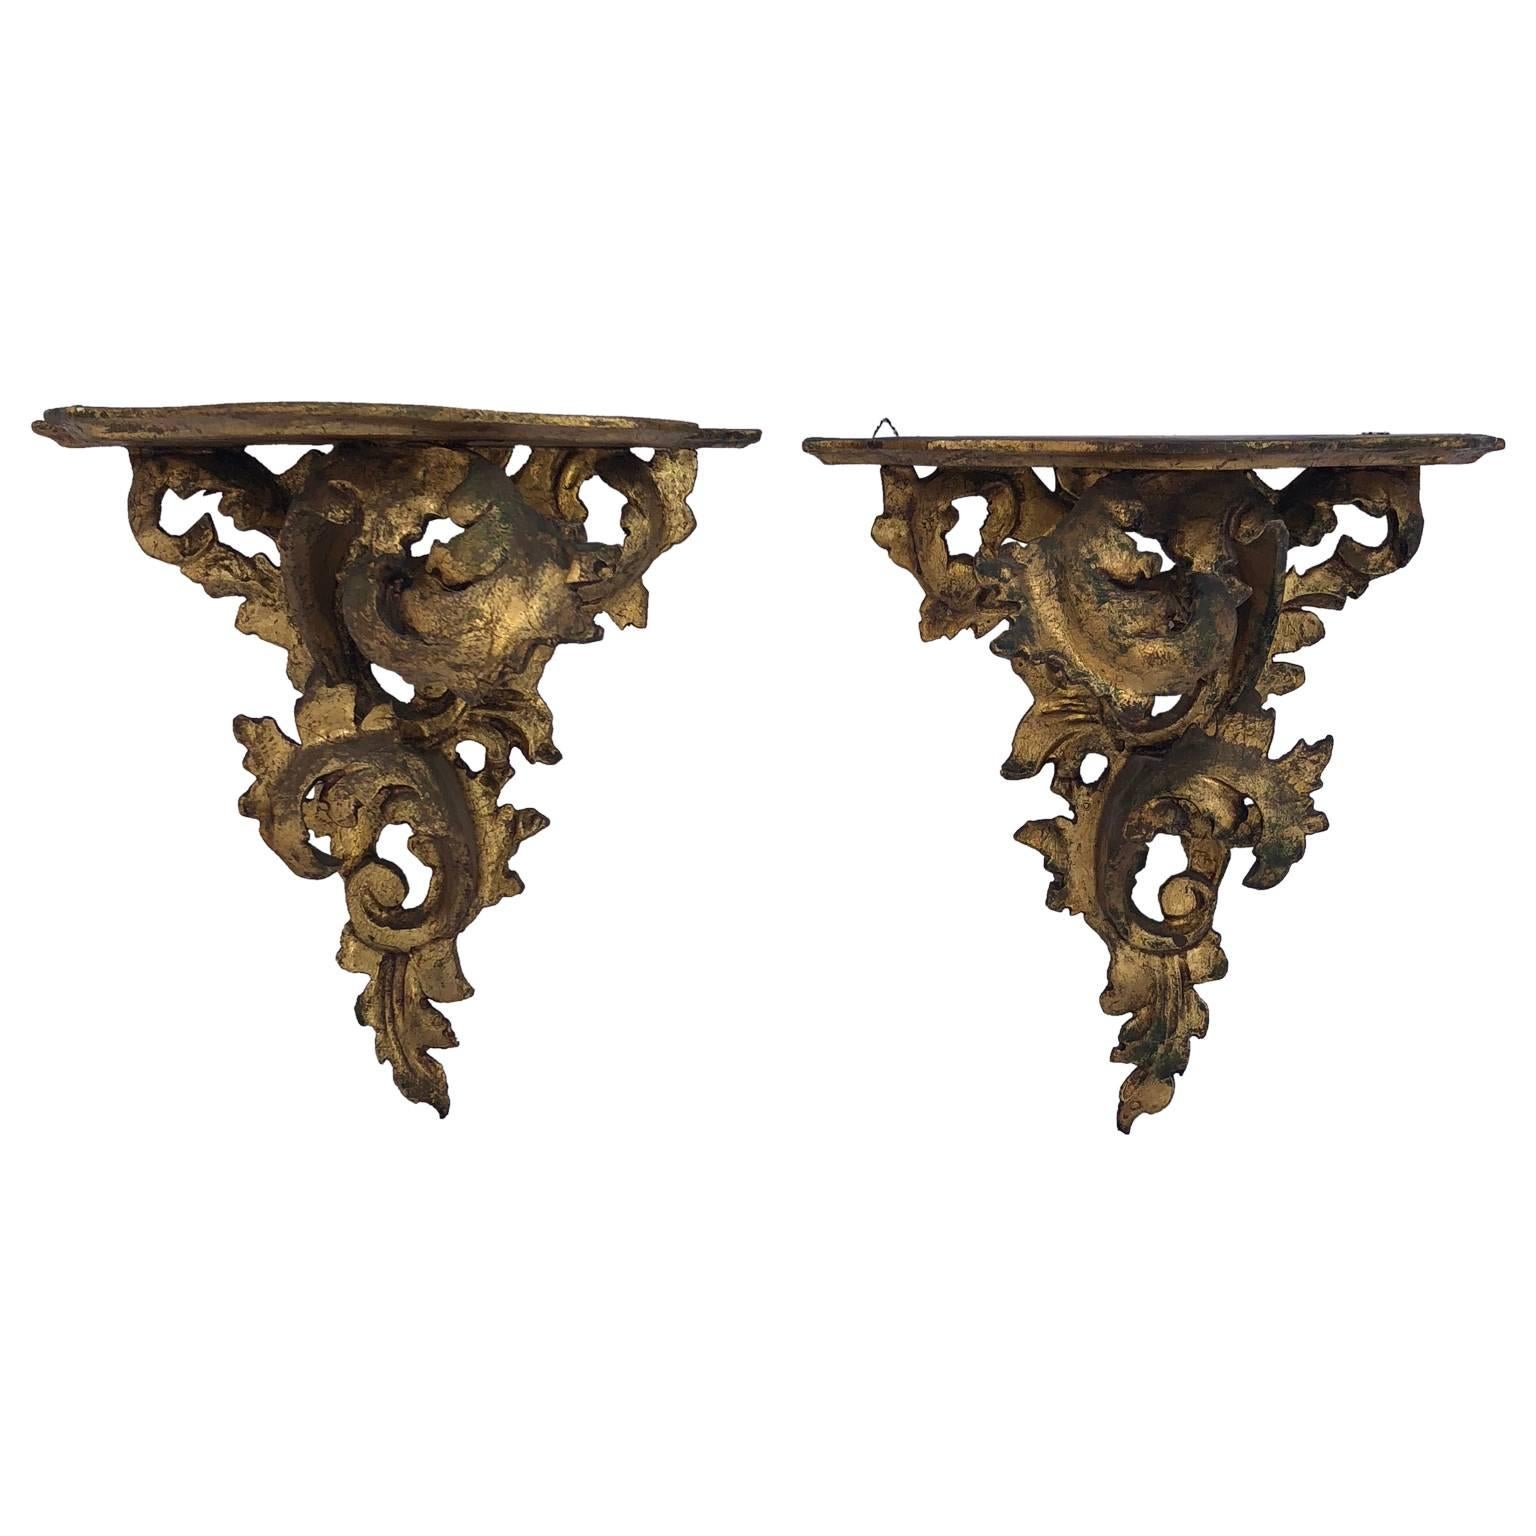 Pair of carved wood Rococo style wall mounted shelves.